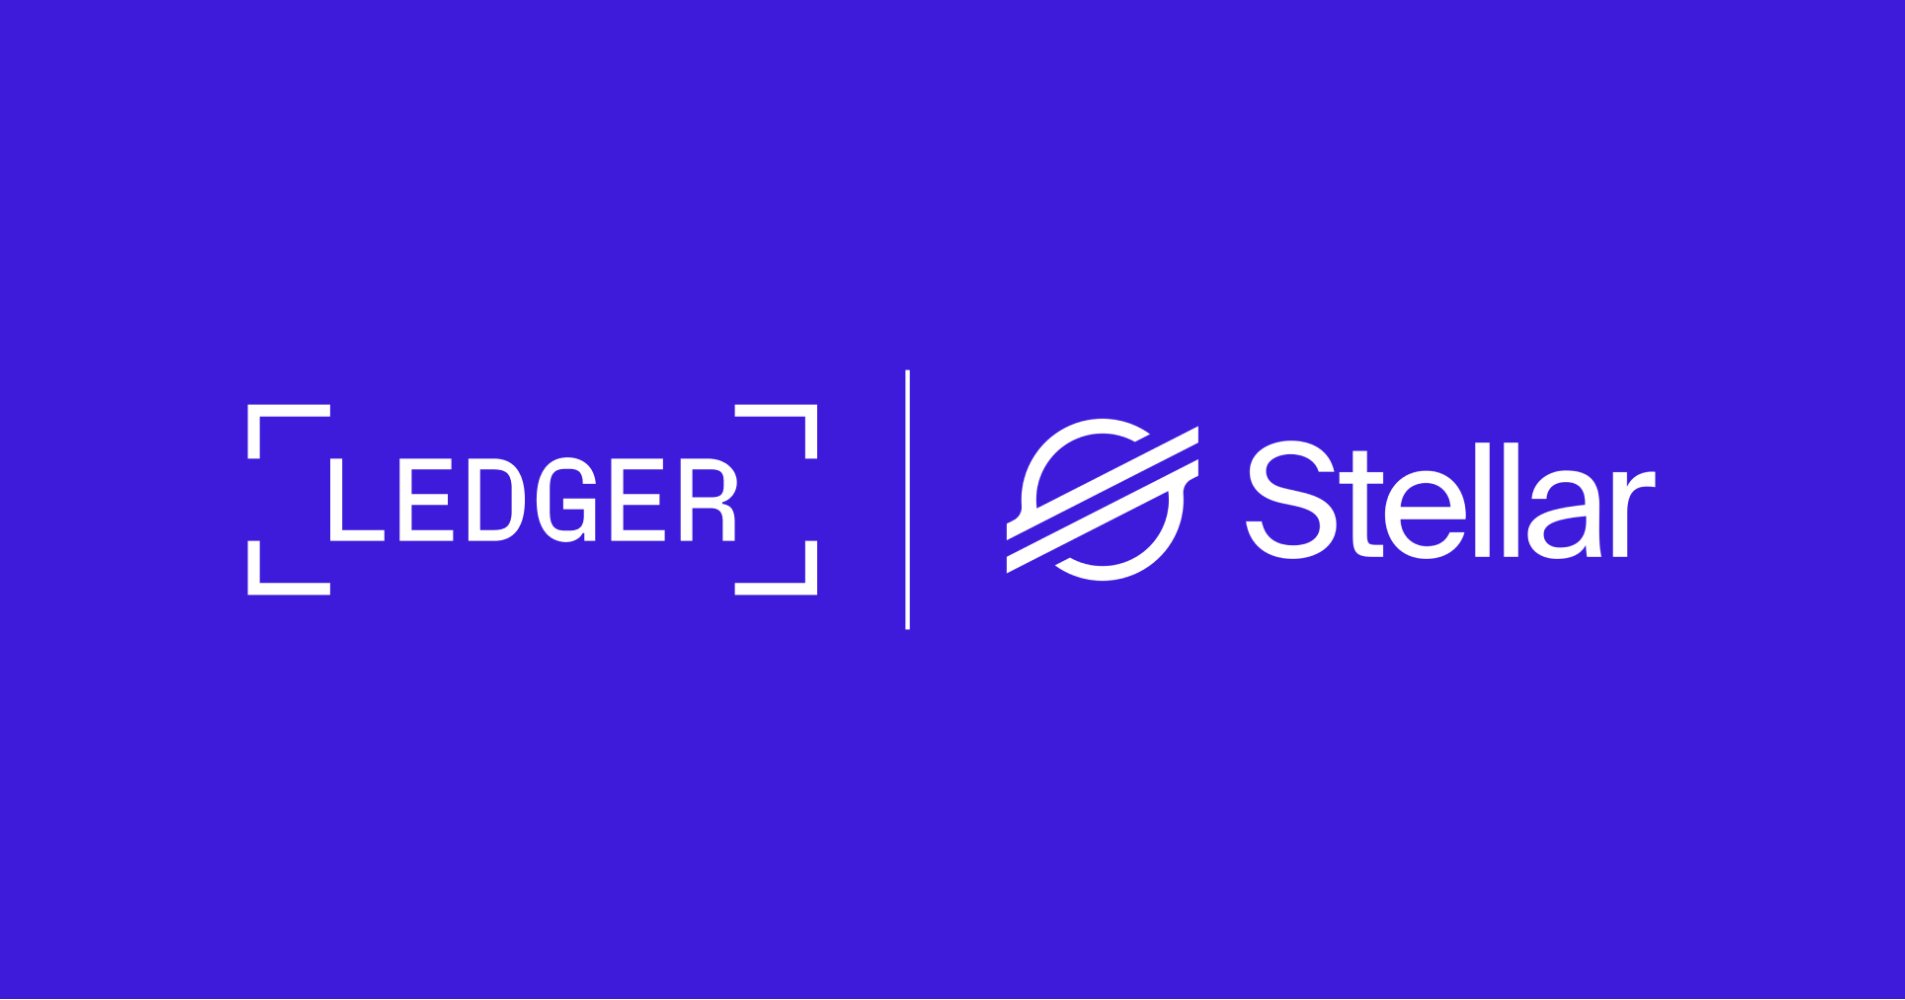 How to buy USD-Coin (USDC) ? Step by step guide for buying USDC | Ledger